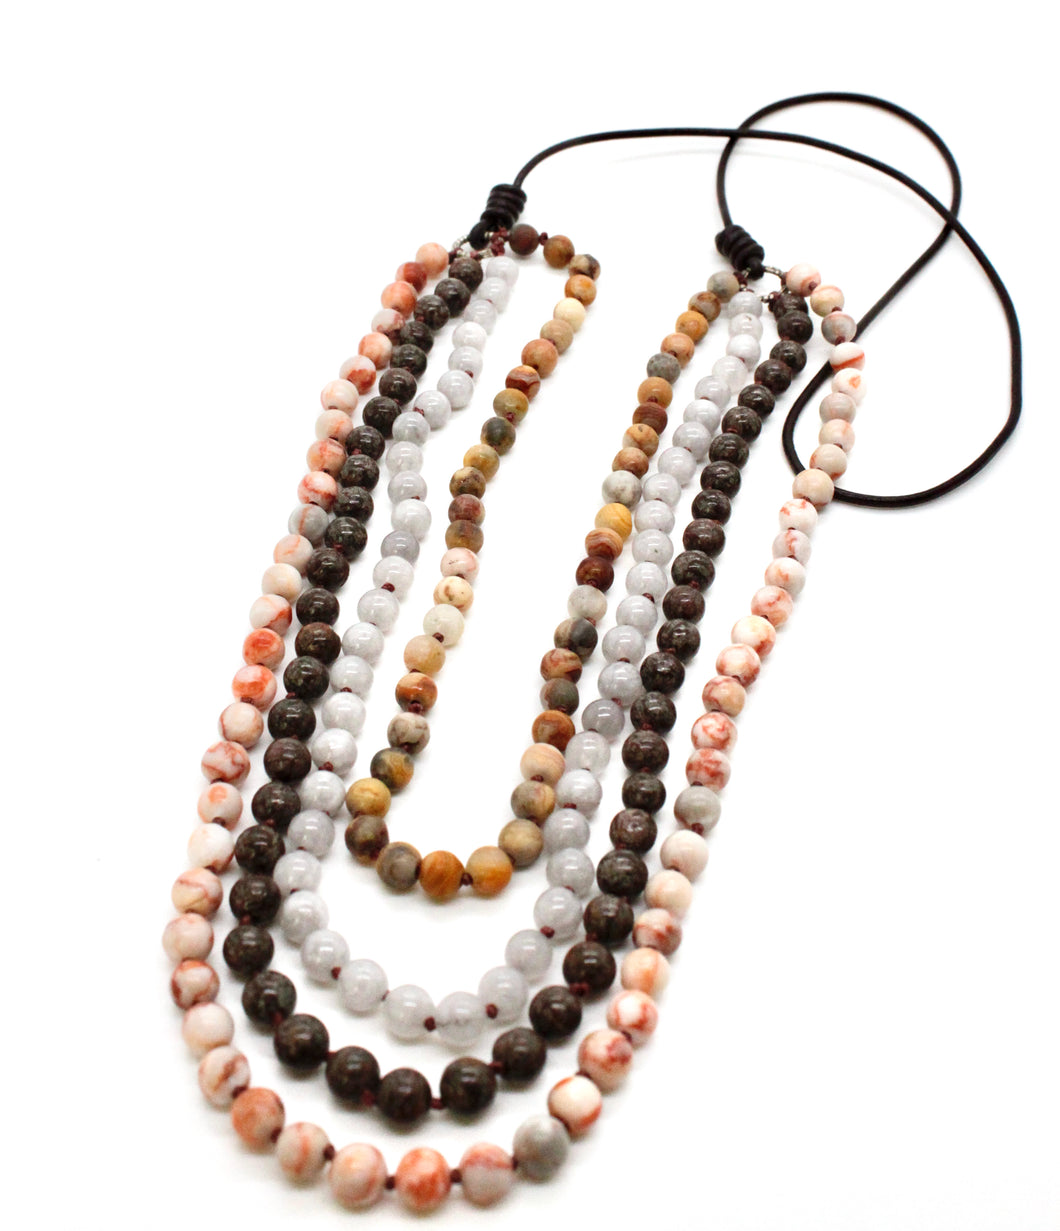 Large Semi Precious Stone Hand Knotted Long Necklace on Genuine Leather -Layers Collection- NLL-M32